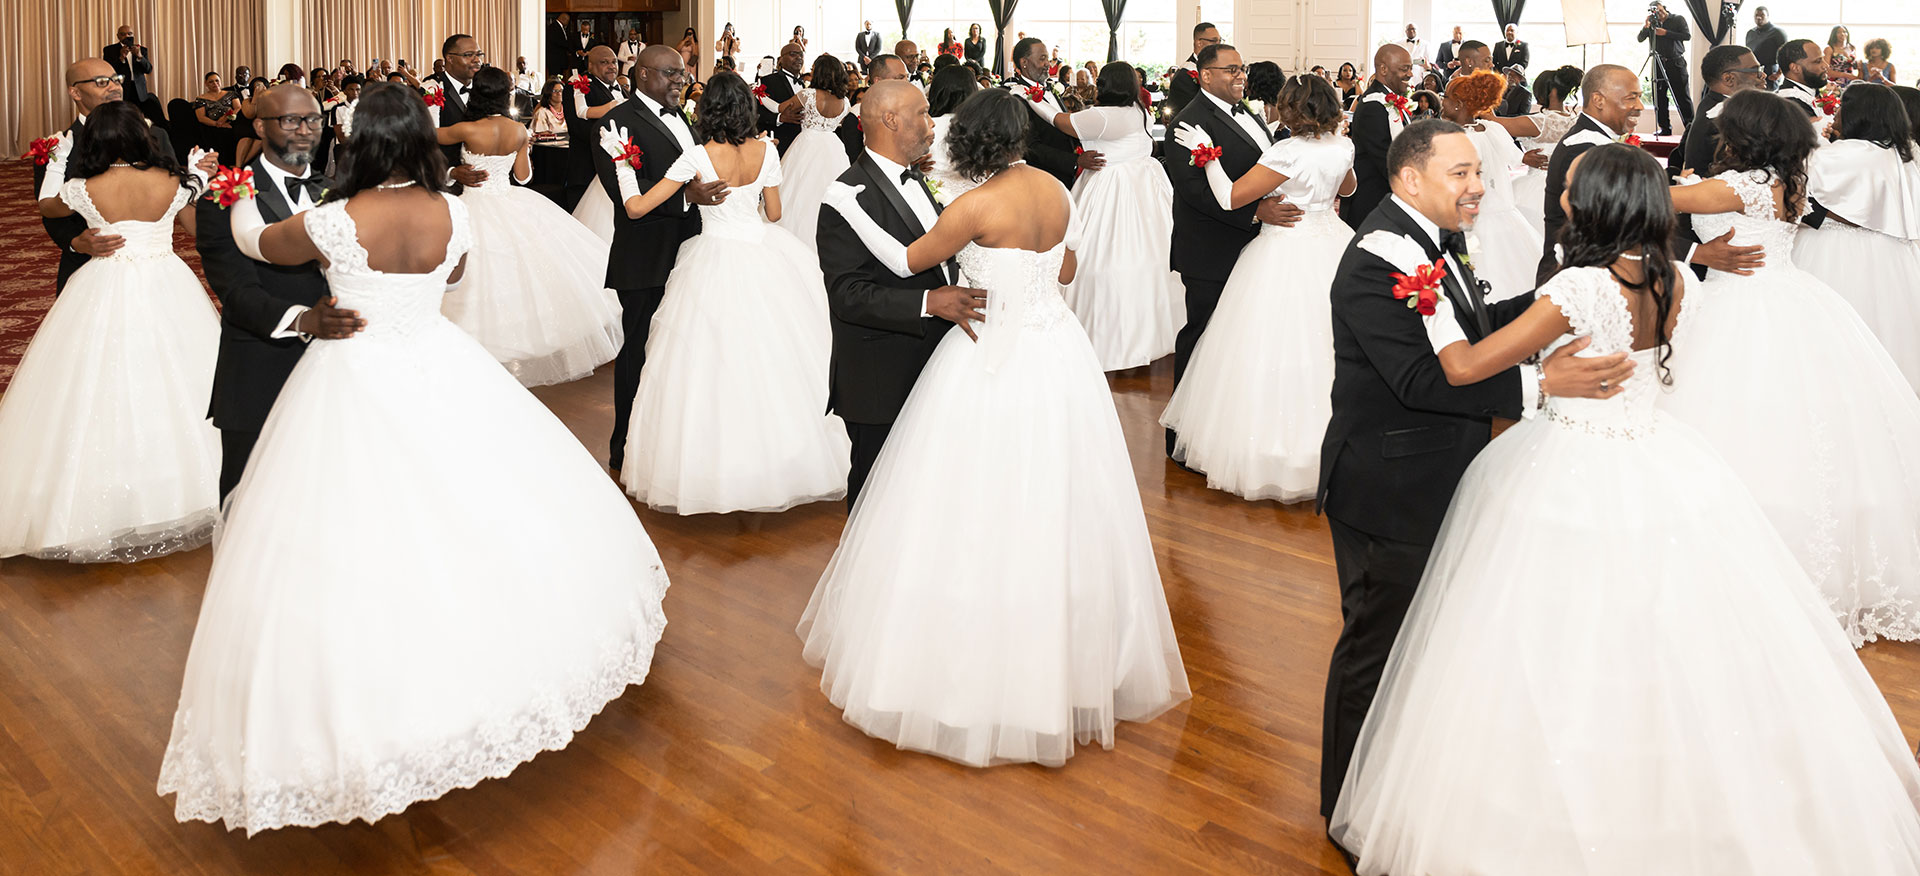 Image of young debutante ladies in white dresses performing.